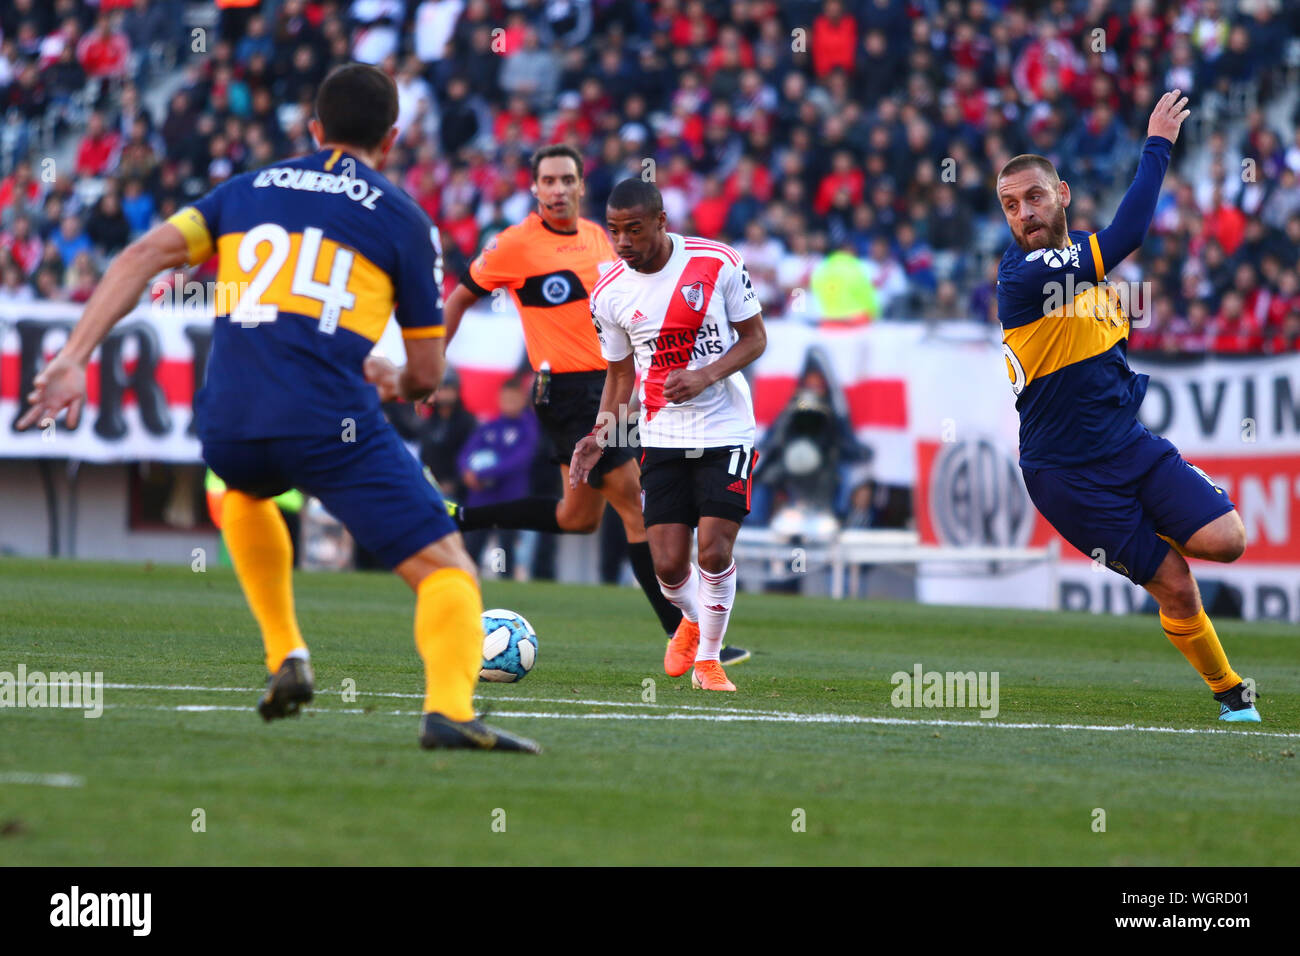 BUENOS AIRES, 01.09.2019: Nicolás De la Cruz during the derby between River Plate and Boca Juniors for match of Superliga Argentina on Monumental Stad Stock Photo